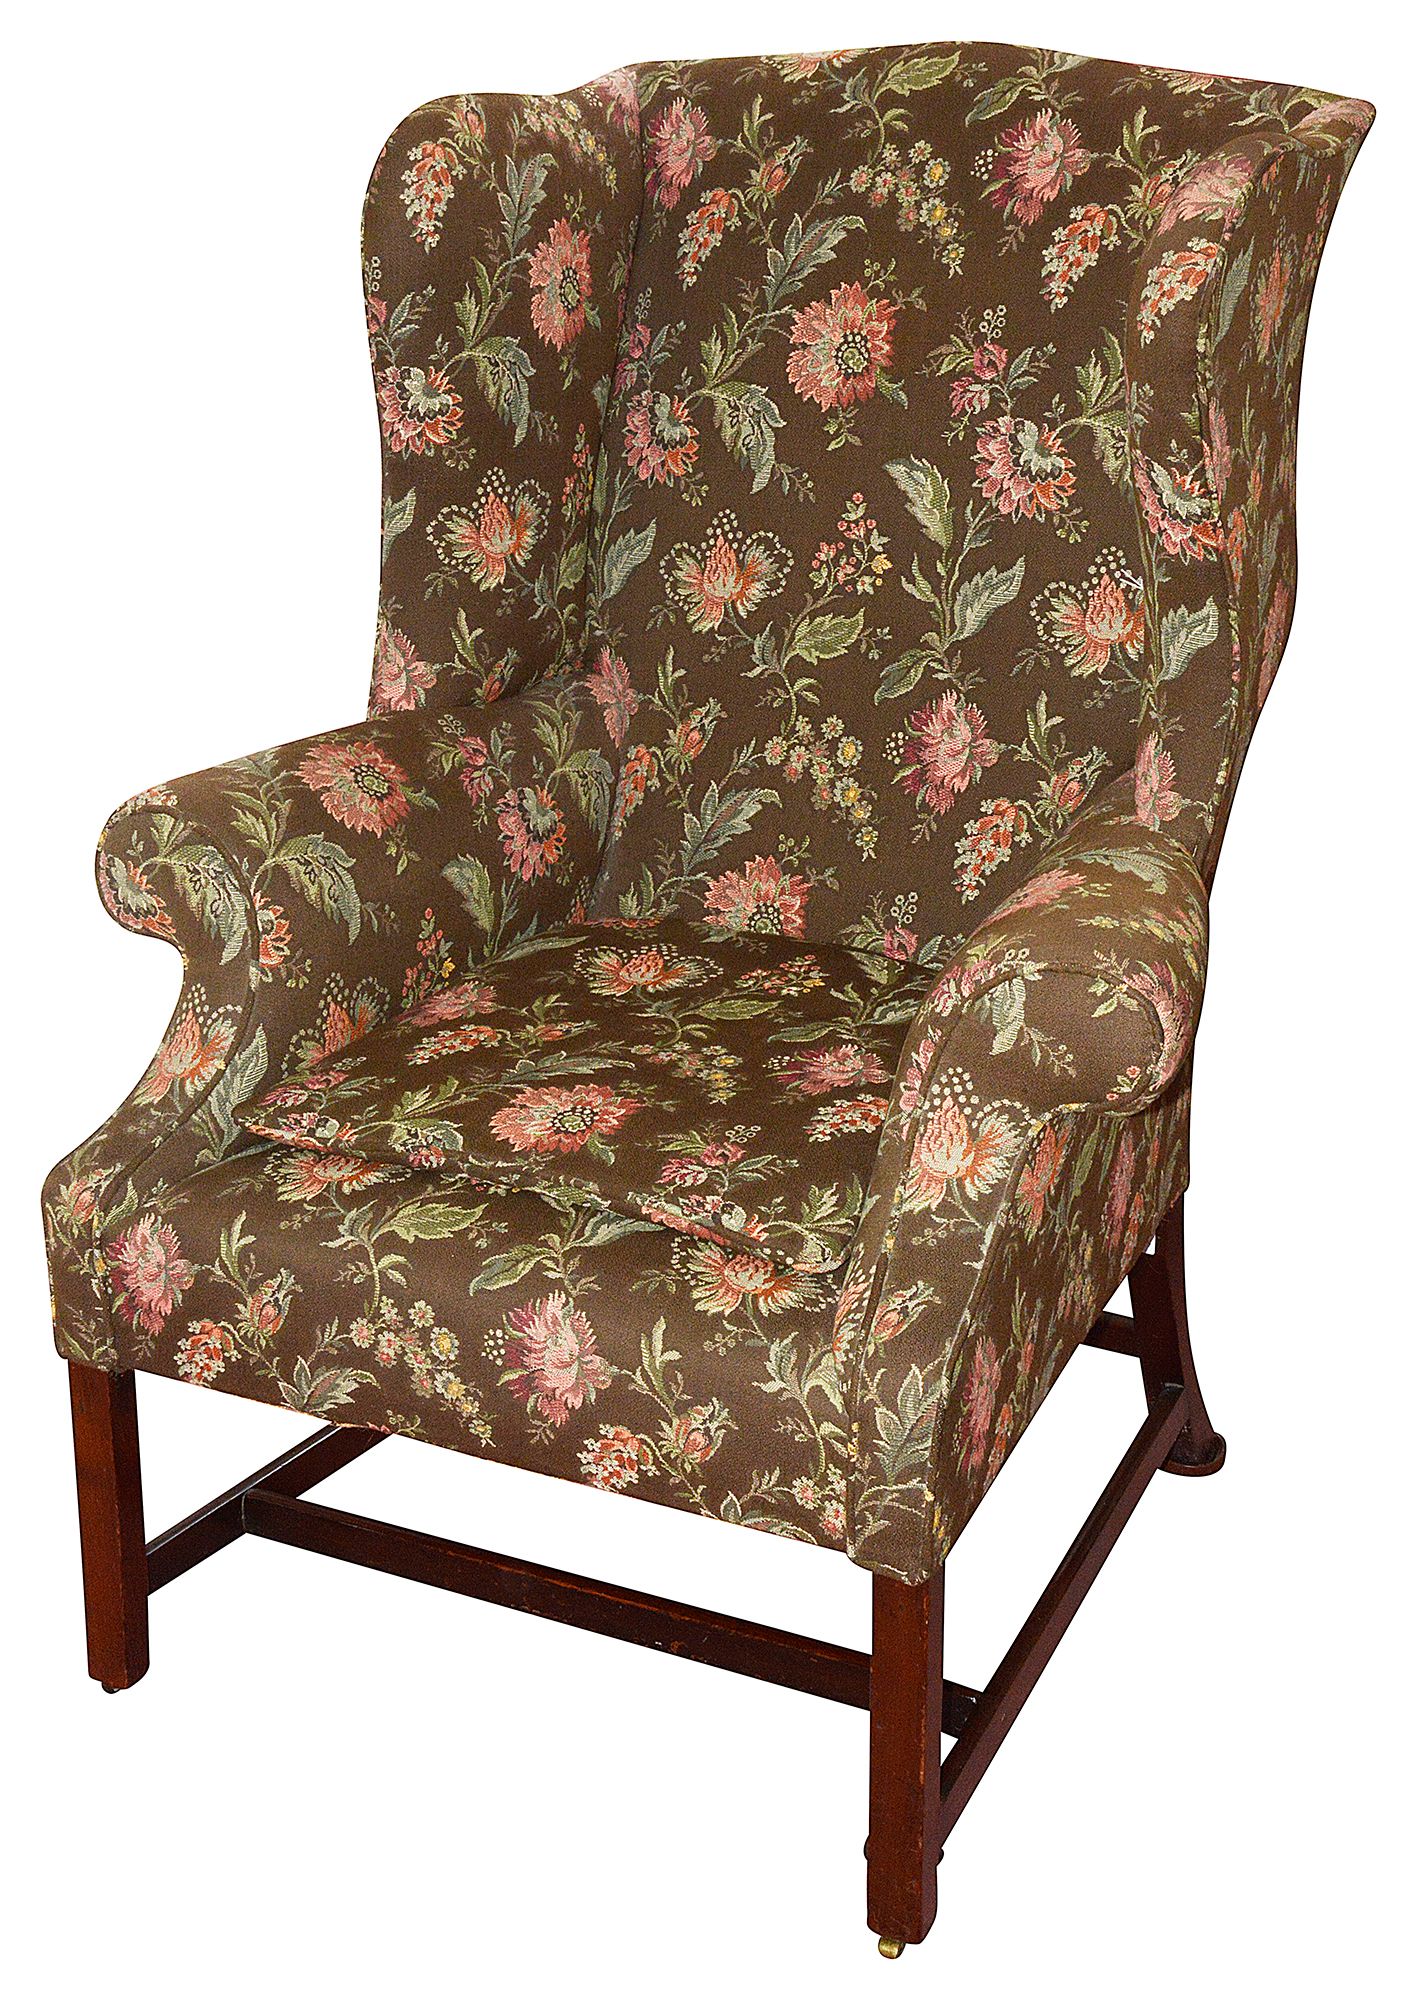 A George III mahogany and upholstered wing back armchair